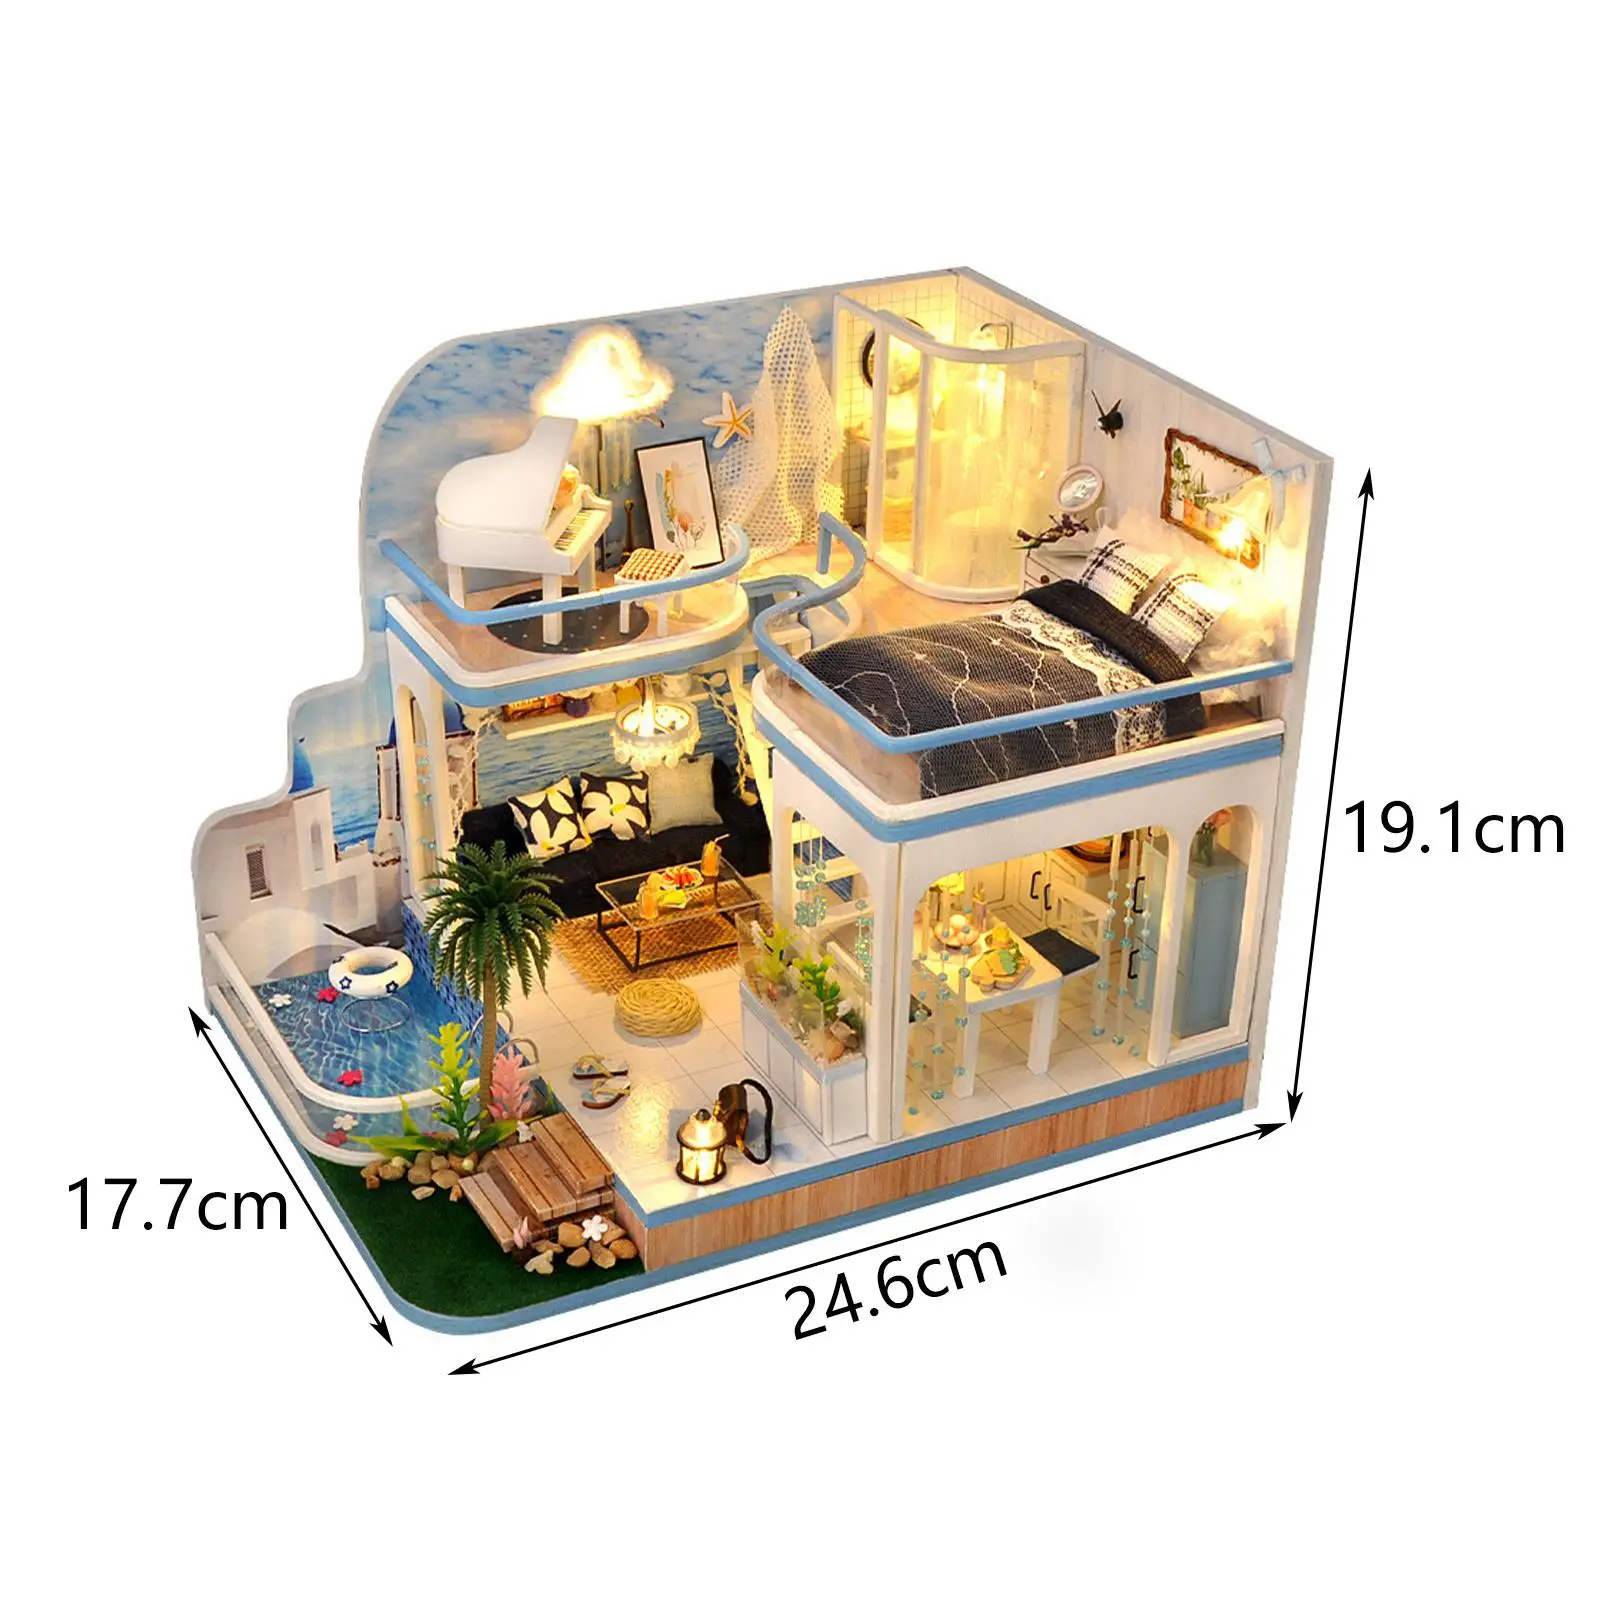 Creative DIY Miniature Dollhouse Kit with Dust Proof Cover 3D Building Puzzle Crafts Self Assembled Wooden for Teens Girl Toys